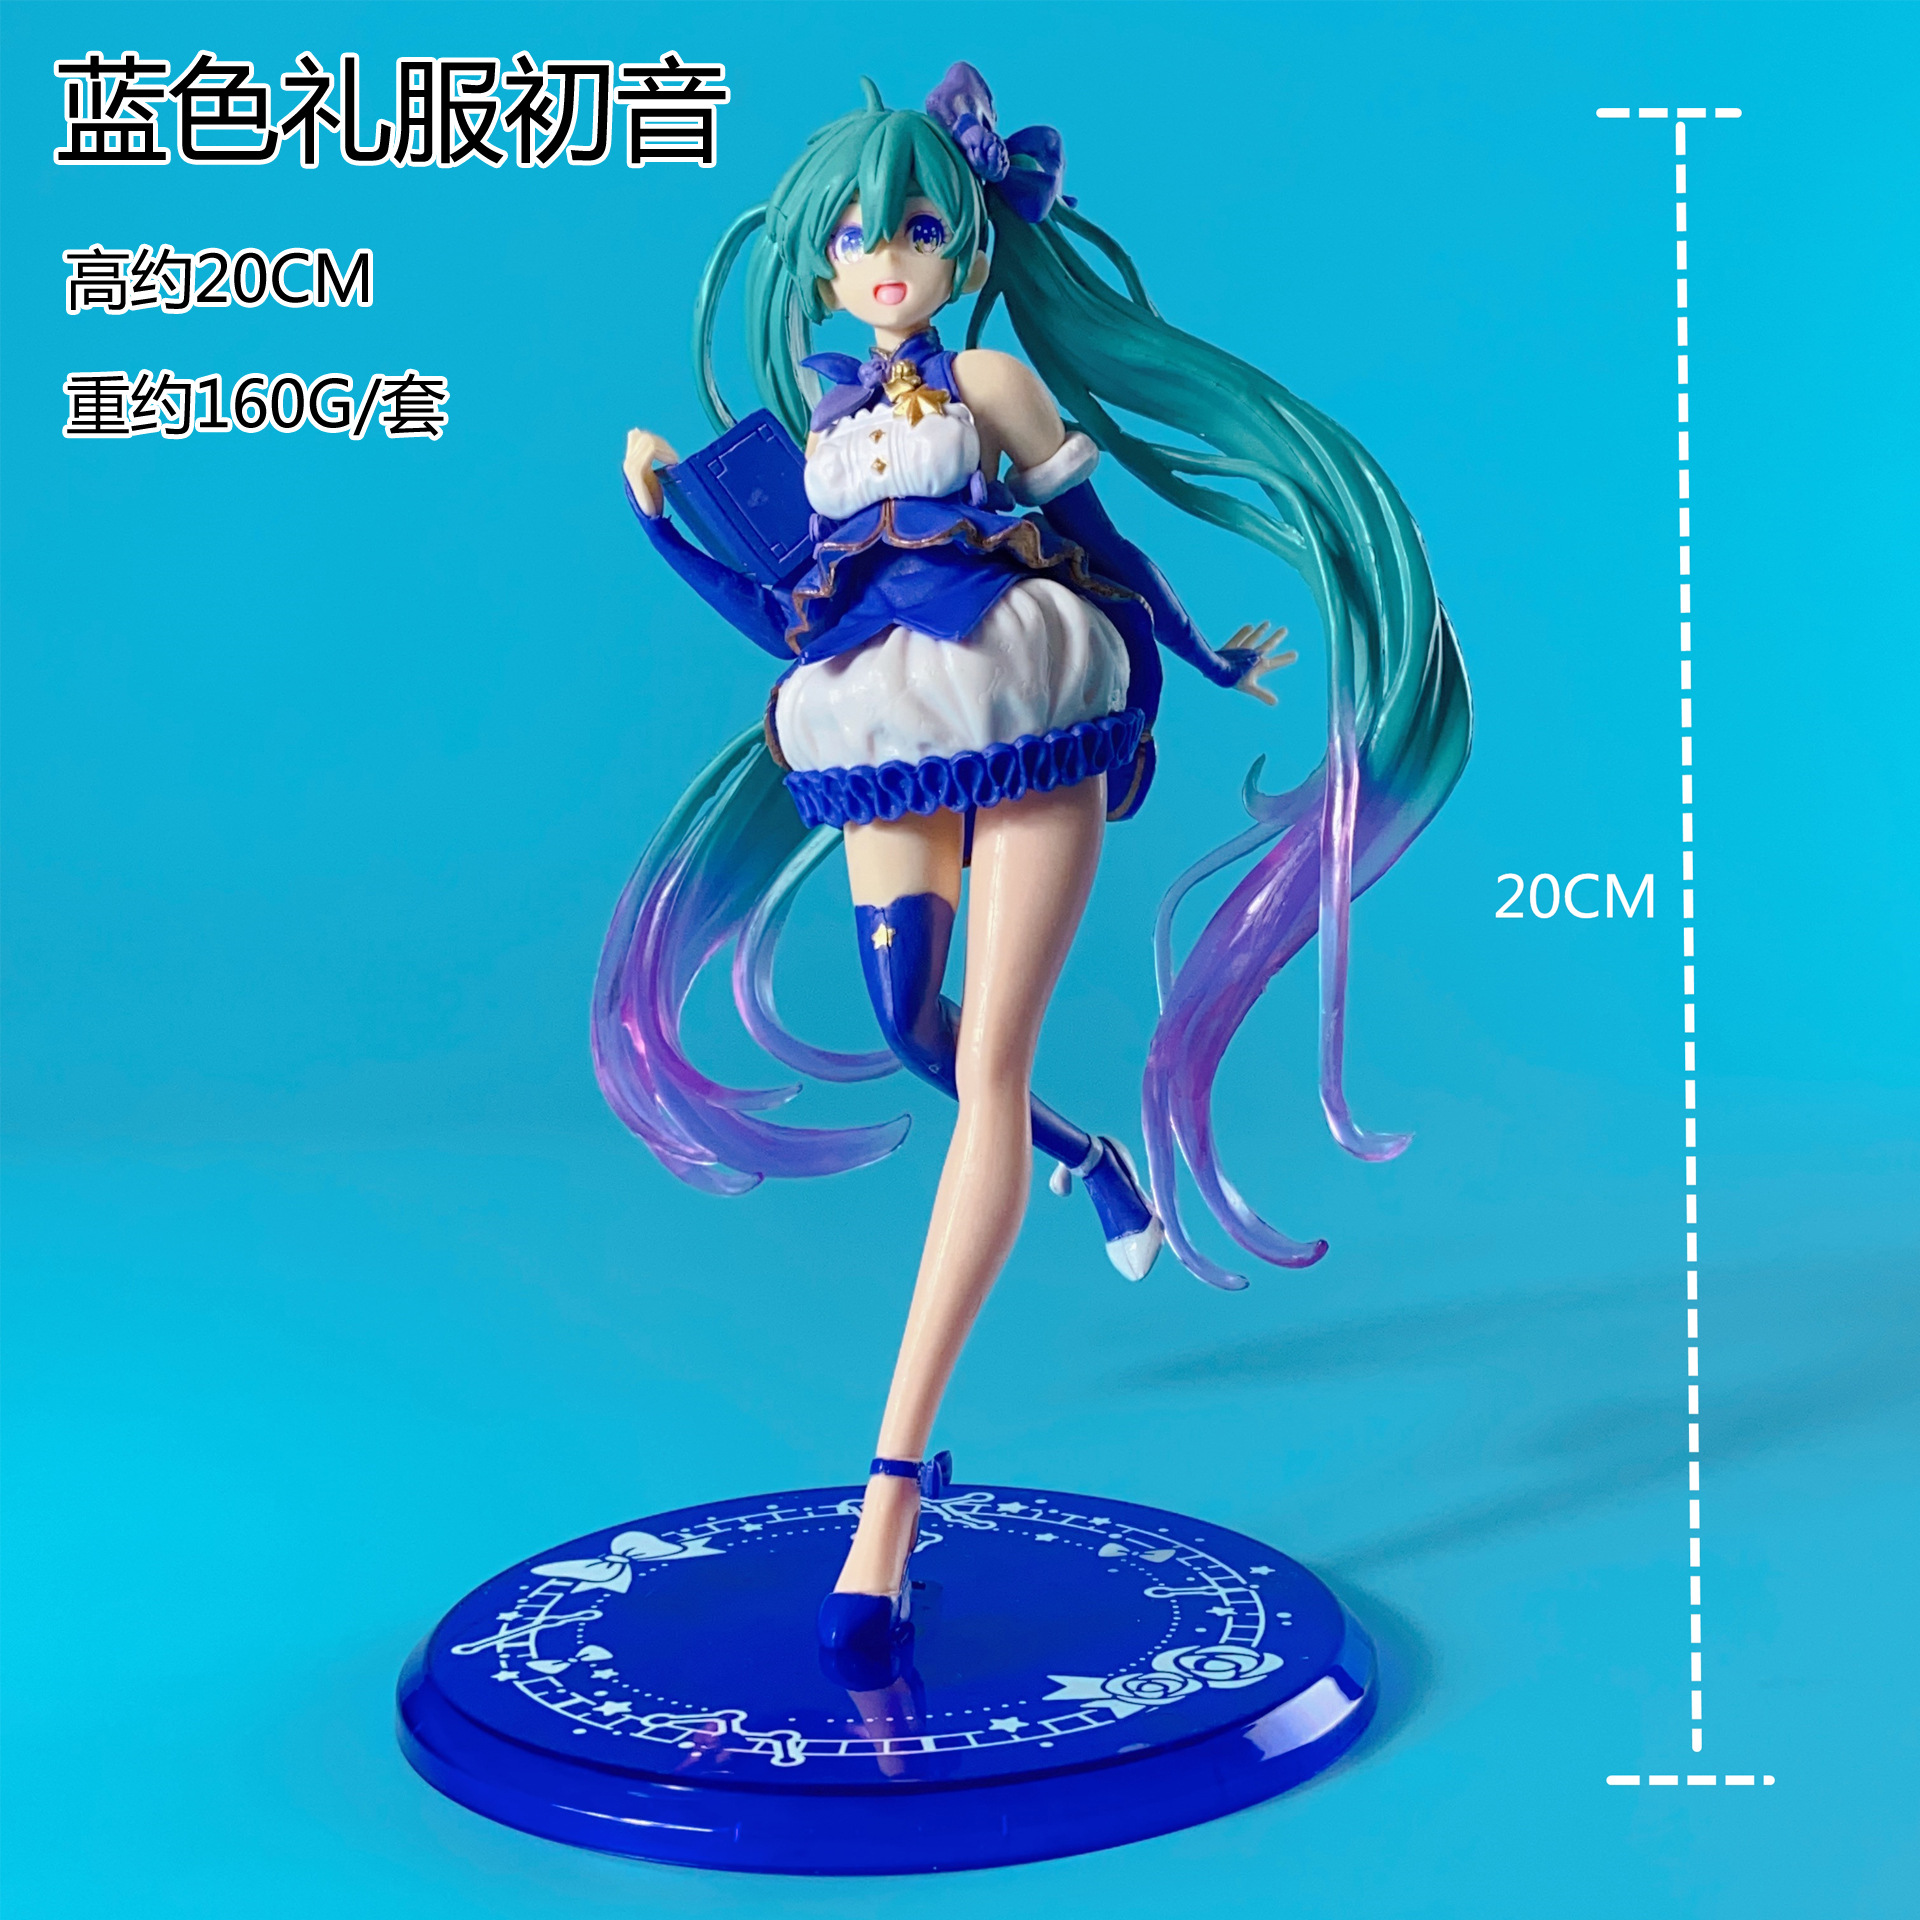 in Stock and Fast Delivery Hatsune Miku Prize Figure Cinderella Sleeping Beauty Fairy Tale Fairyland Girl Gift